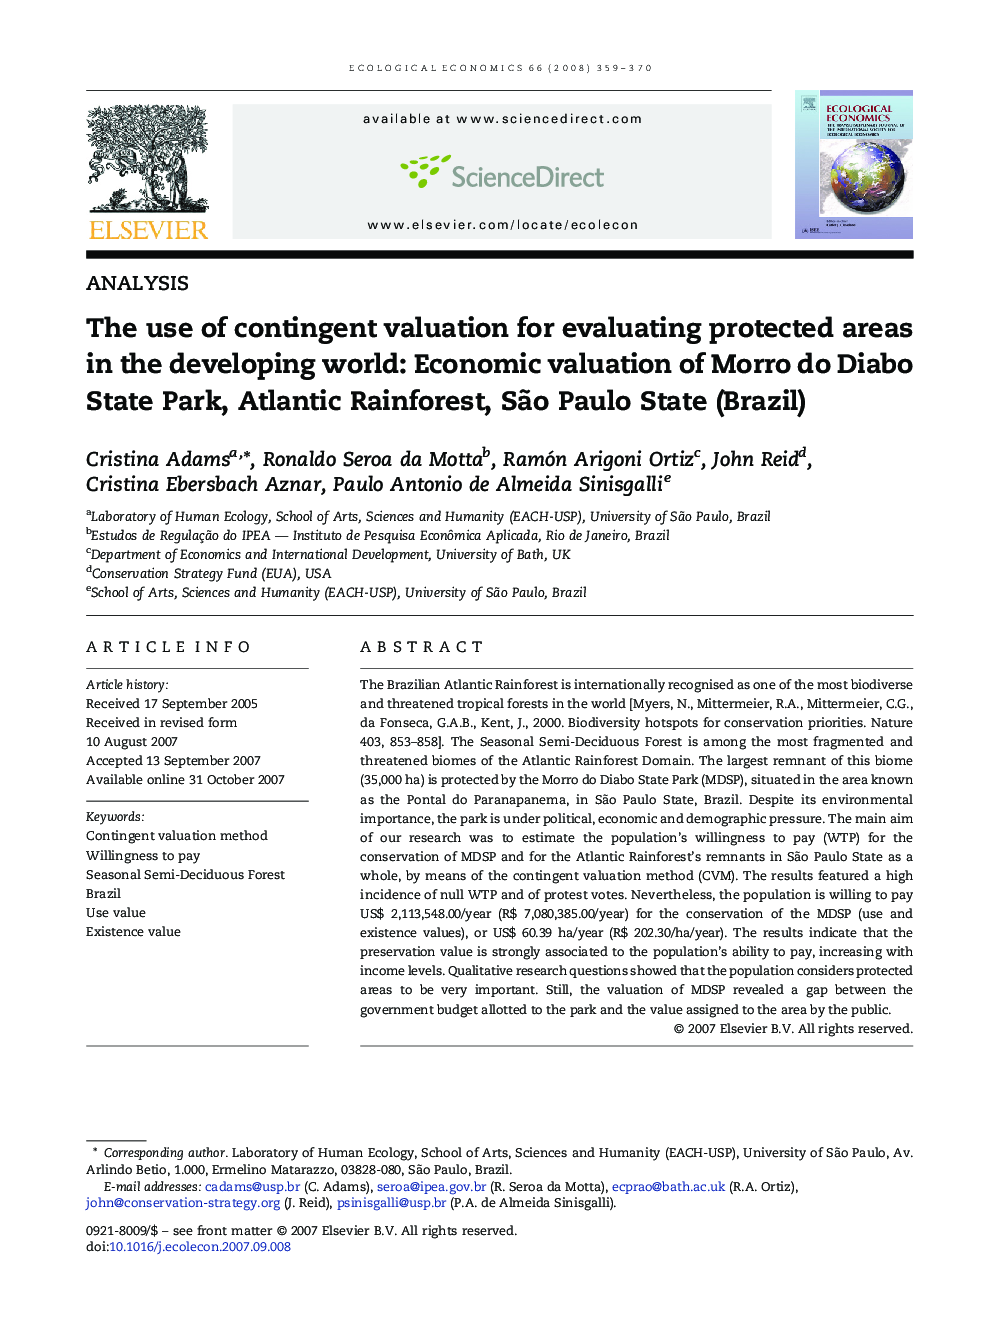 The use of contingent valuation for evaluating protected areas in the developing world: Economic valuation of Morro do Diabo State Park, Atlantic Rainforest, SÃ£o Paulo State (Brazil)